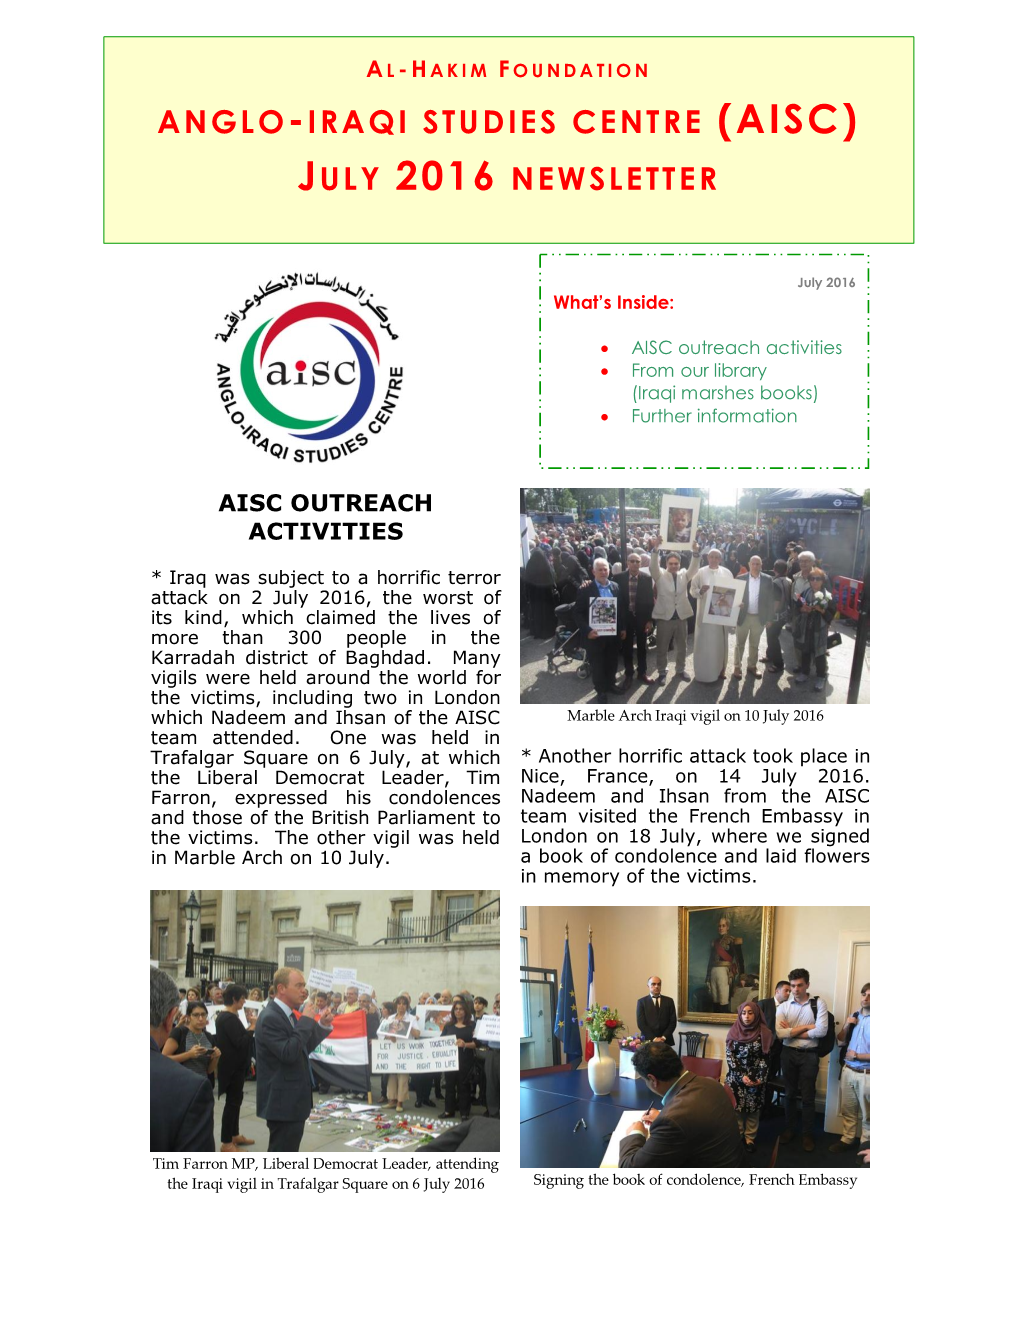 Anglo-Iraqi Studies Centre (Aisc) July 2016 Newsletter